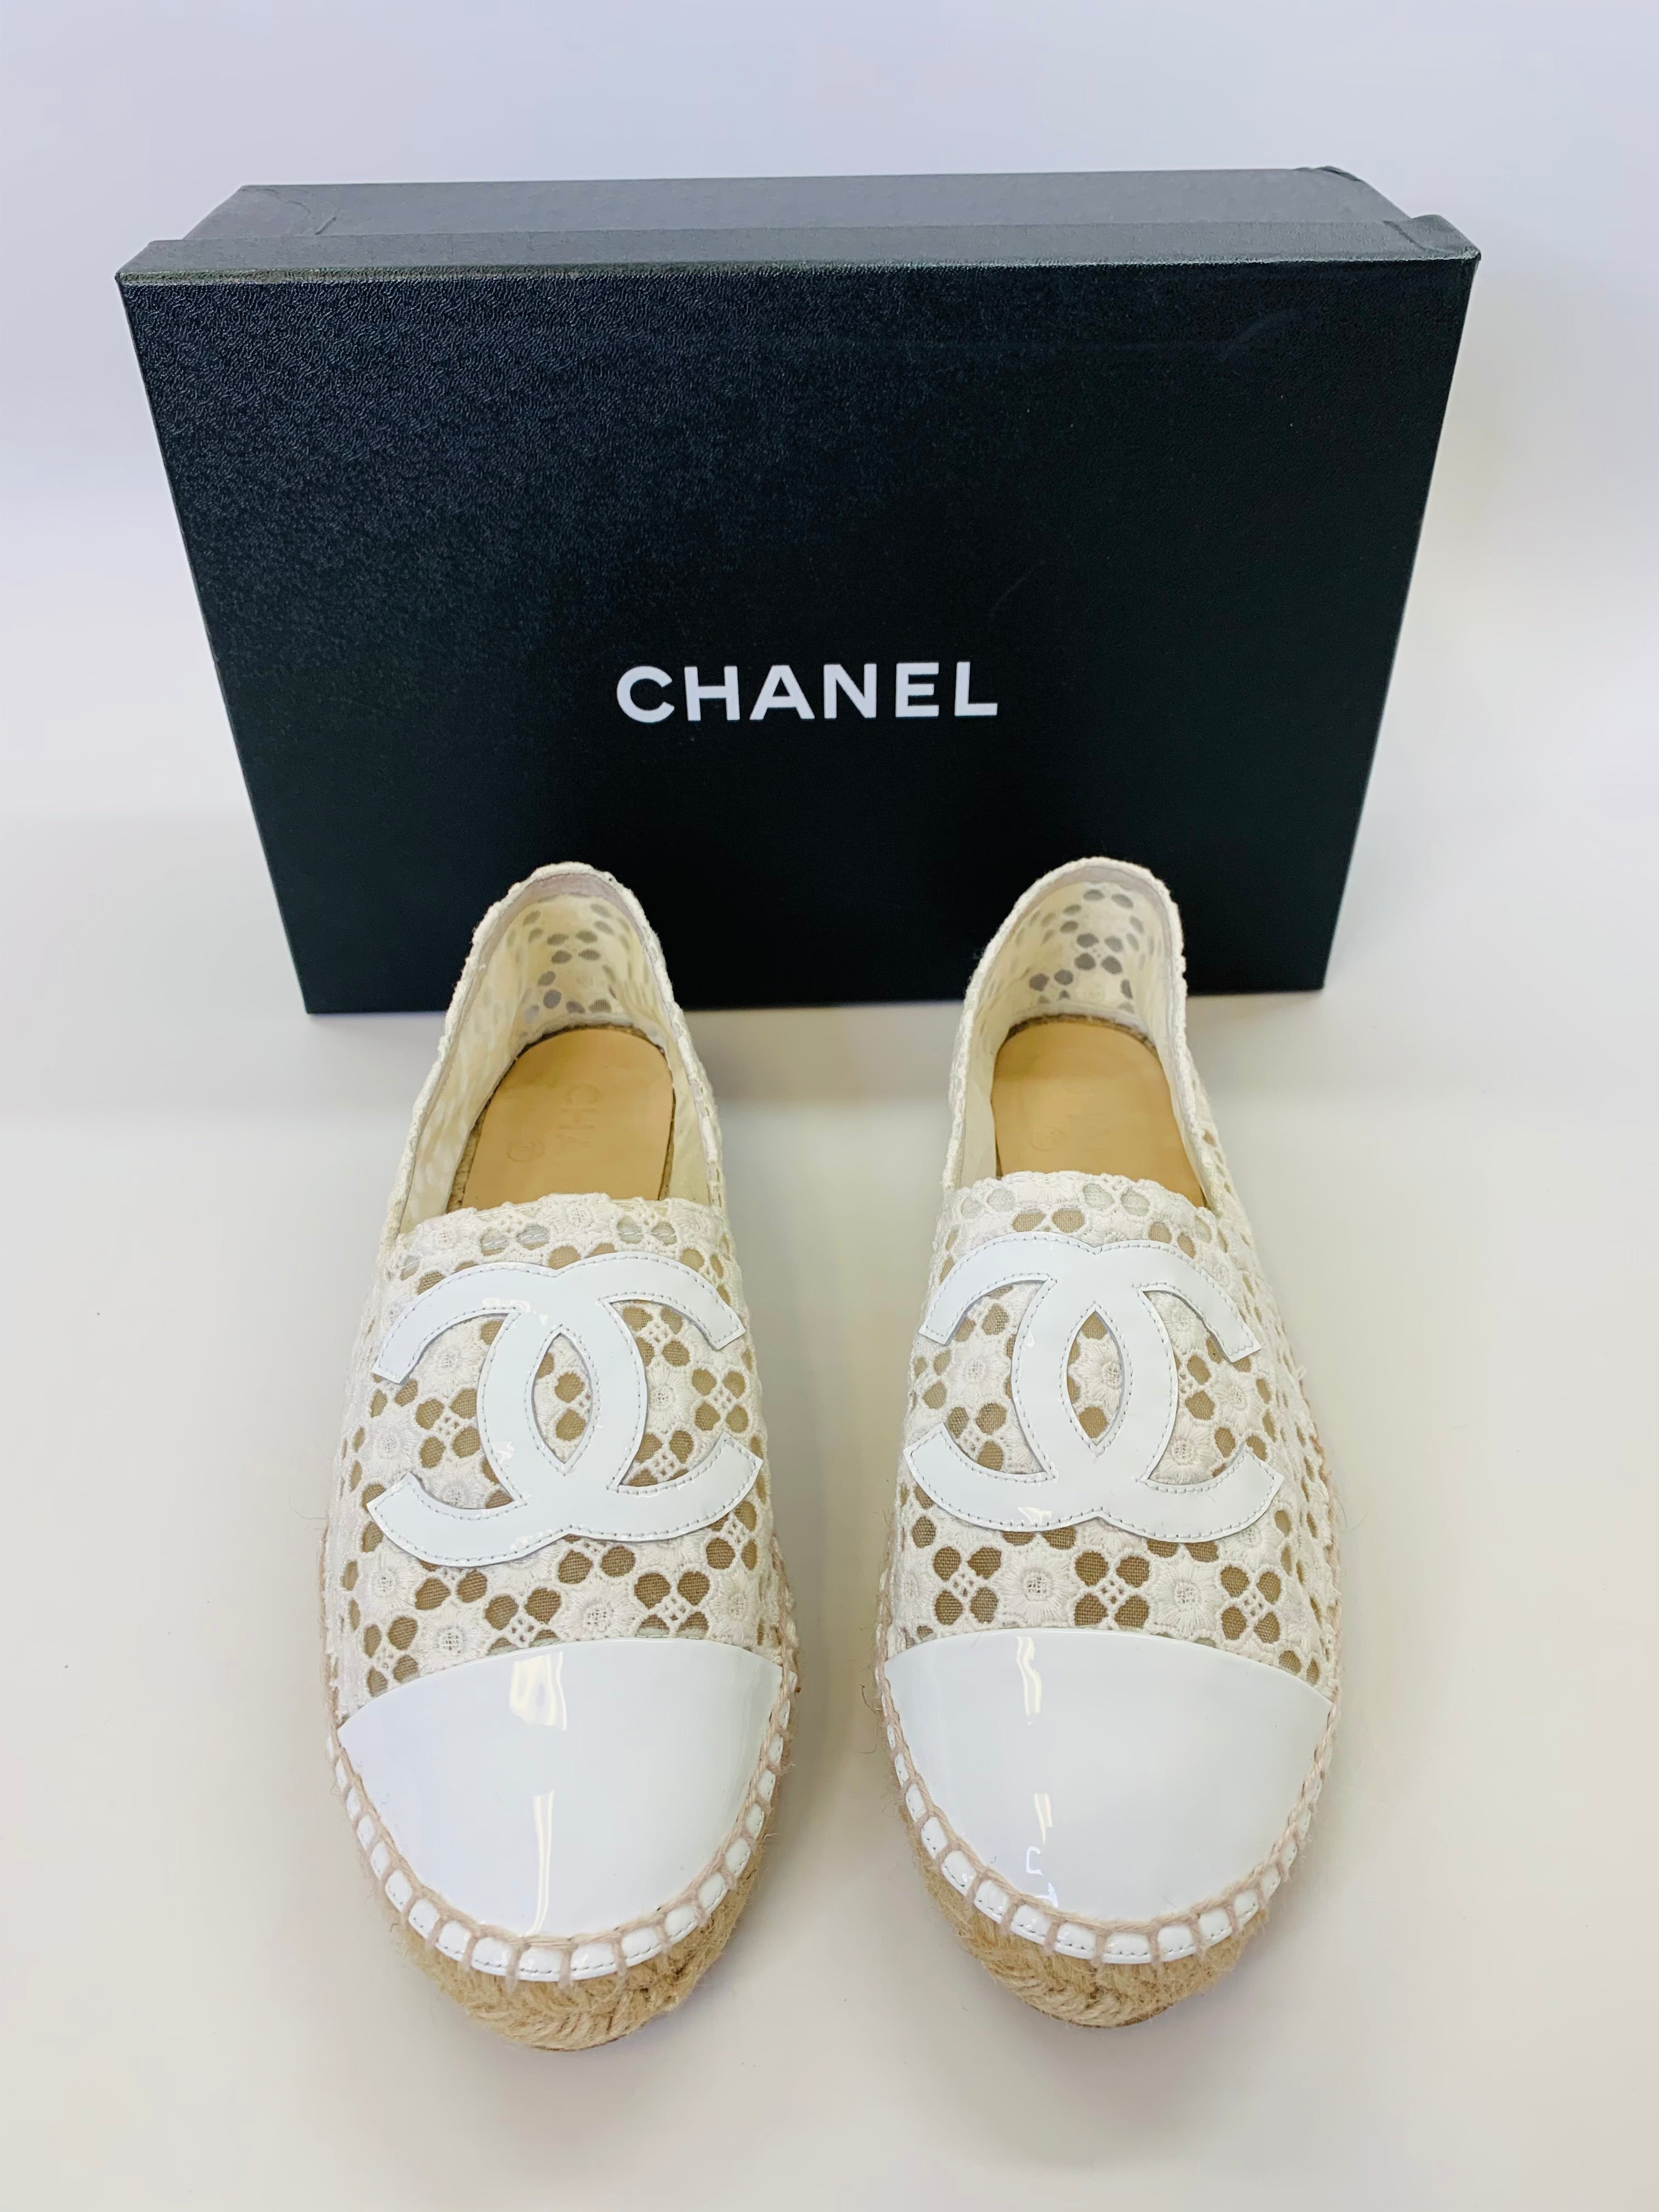 CHANEL Ivory Crochet and Patent Leather Espadrilles Size 39